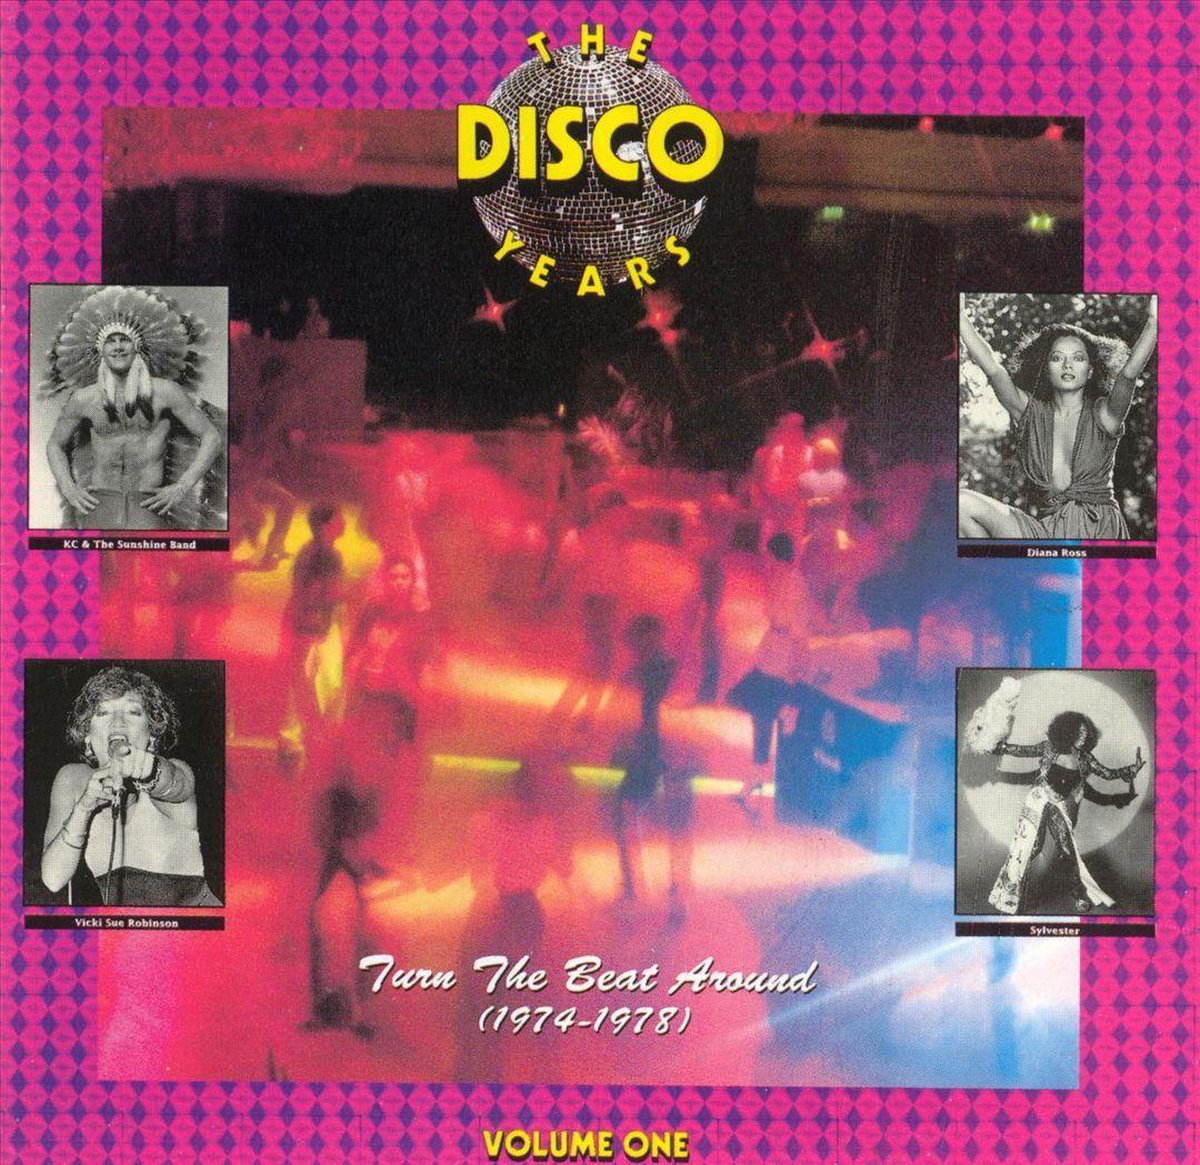 The Disco Years Vol. 1: Turn The Beat Around 74-78 - various artists